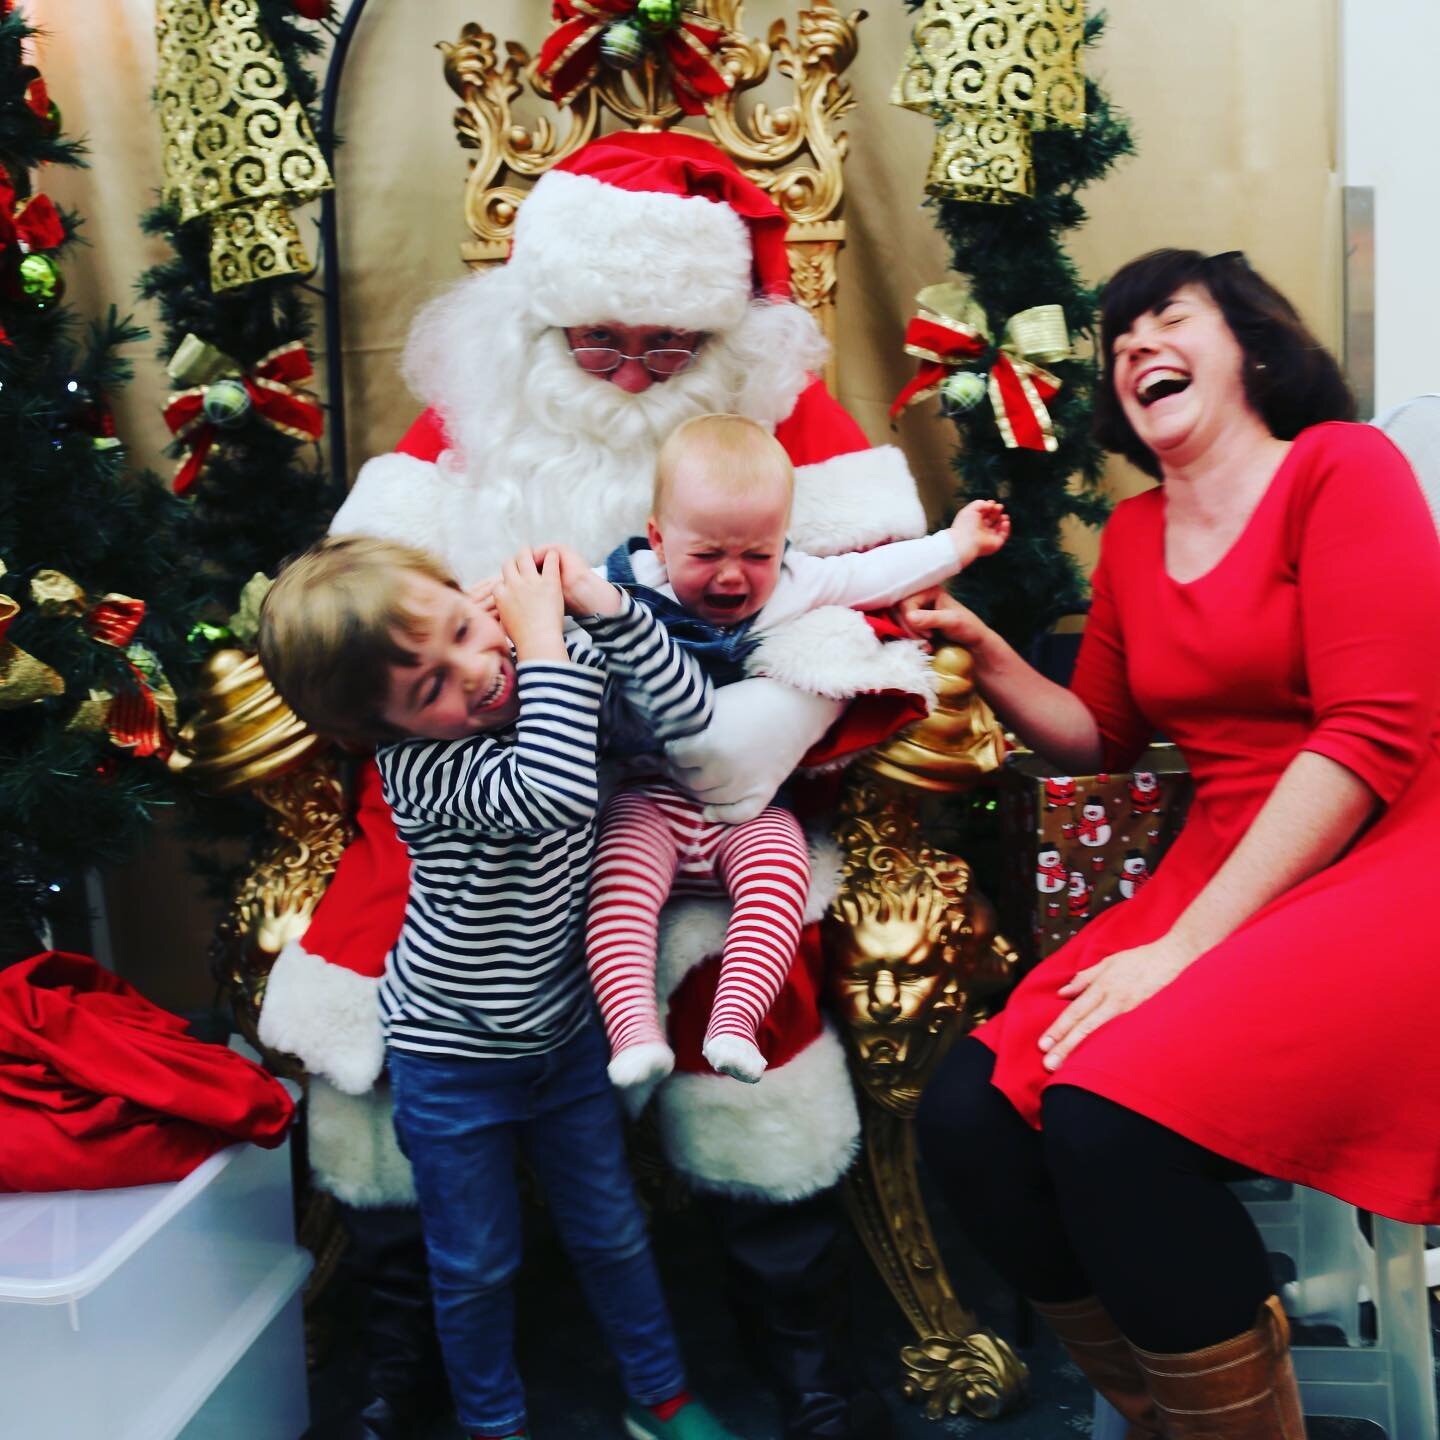 This is my favourite Xmas photo and the reason we gave away the Santa photo idea early on!

I&rsquo;m completely unprepared for Xmas this year, apparently it&rsquo;s soon! 

I just take this approach .. laugh though! 😳😳🎄